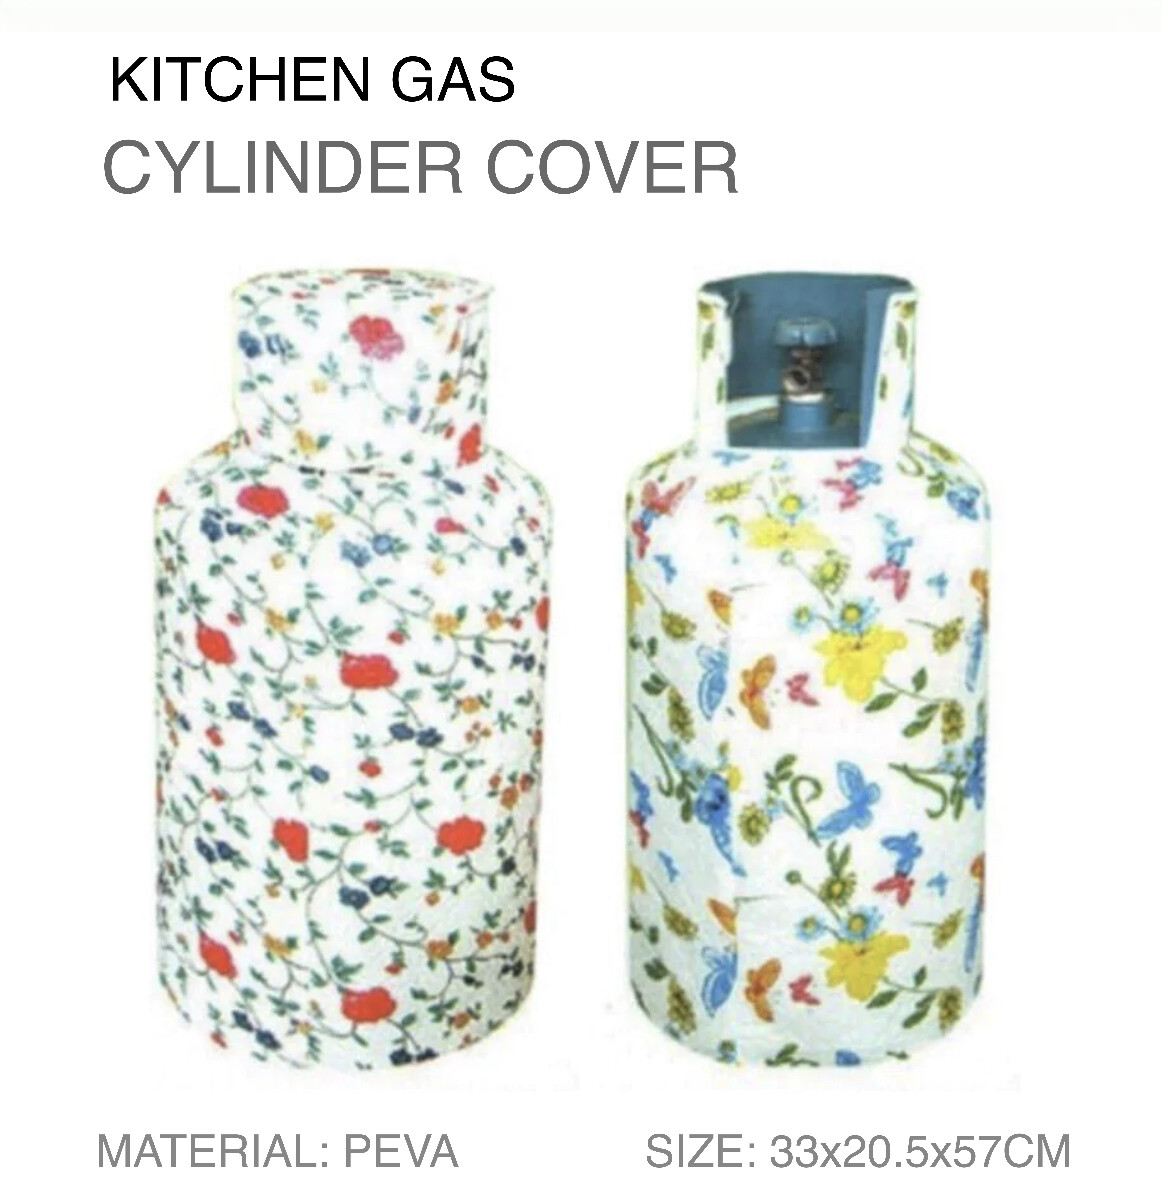 Gas Cylinder Cover